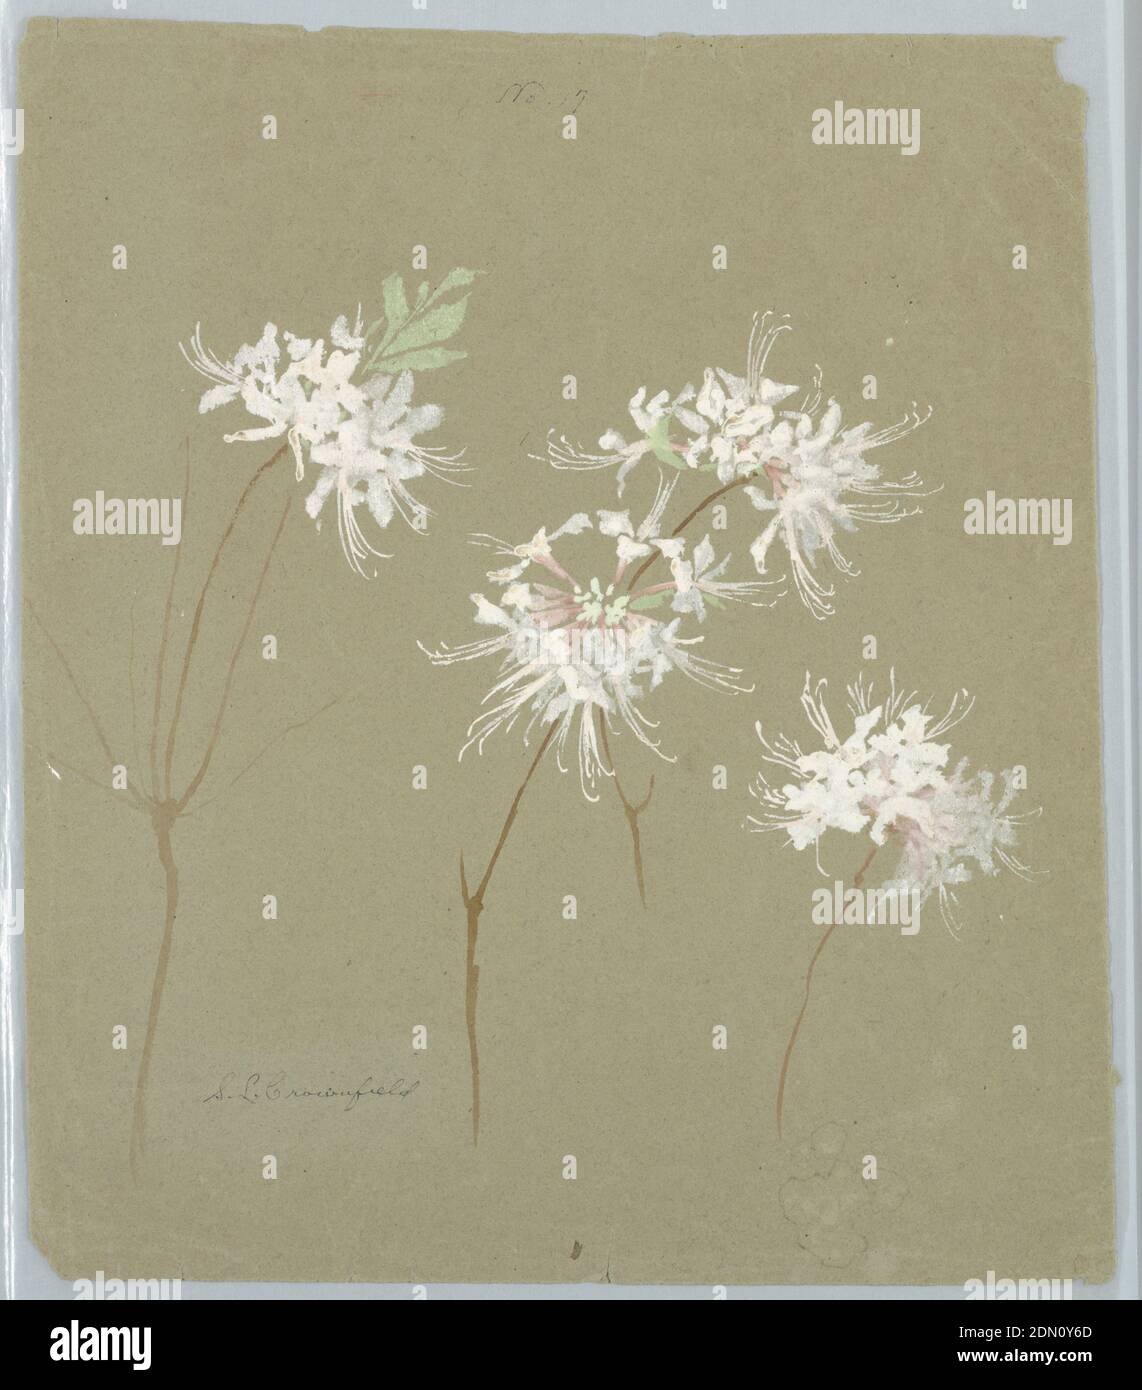 Study of Wild Azalea, Sophia L. Crownfield, (American, 1862–1929), Brush and watercolor on gray paper, Vertical sheet depicting white and pink wild azalea blossoms with green foliage on recto. On verso, sprays of dogwood., USA, early 20th century, nature studies, Drawing Stock Photo